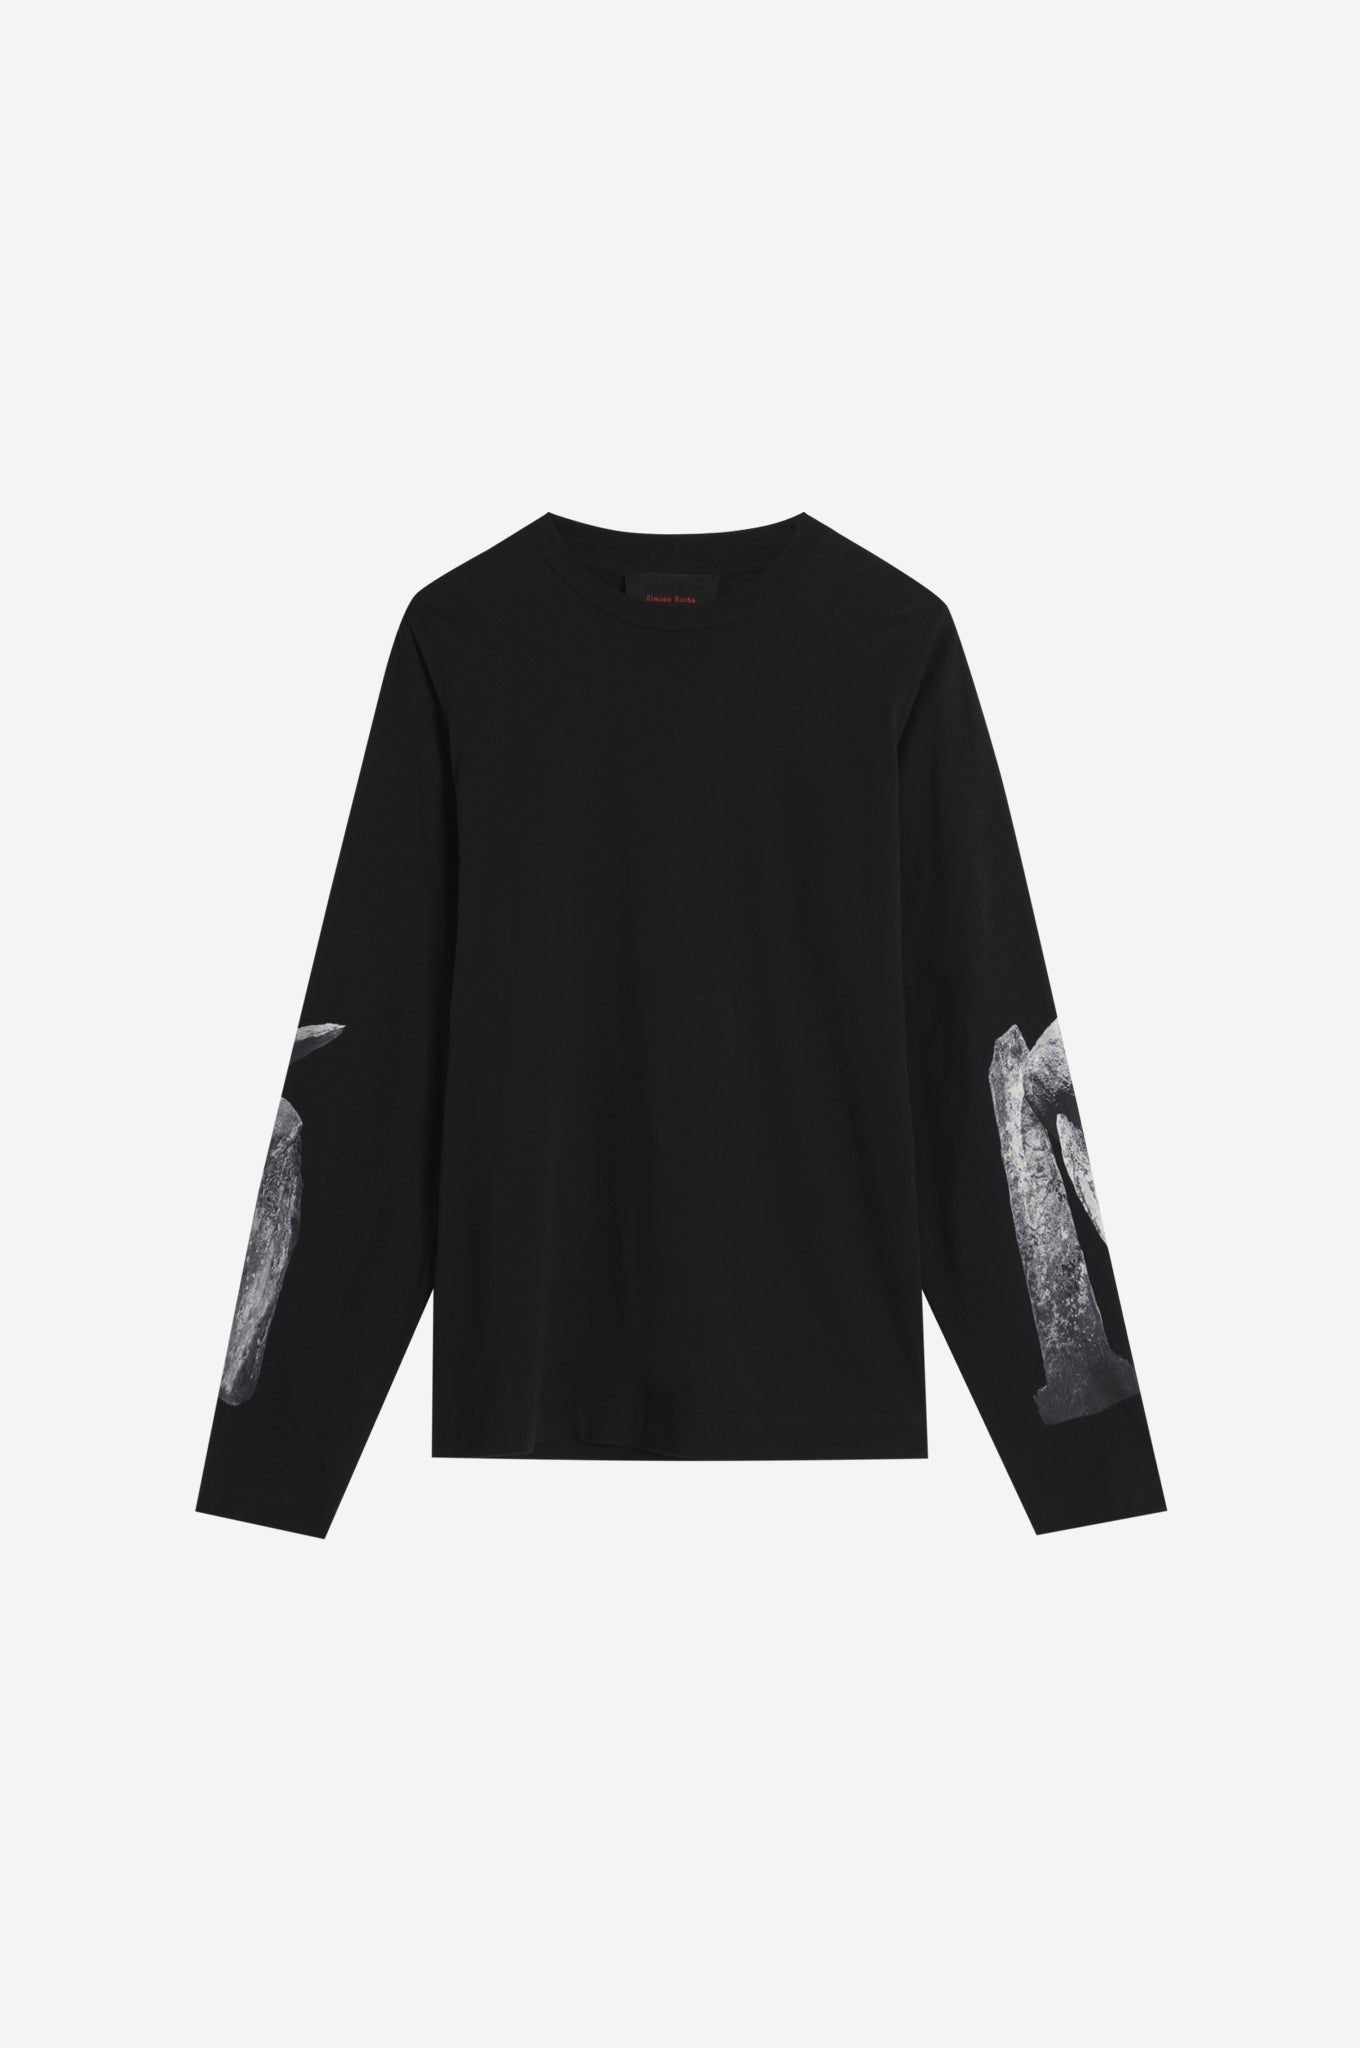 Graphic Project Long Sleeve T-Shirt - Stones